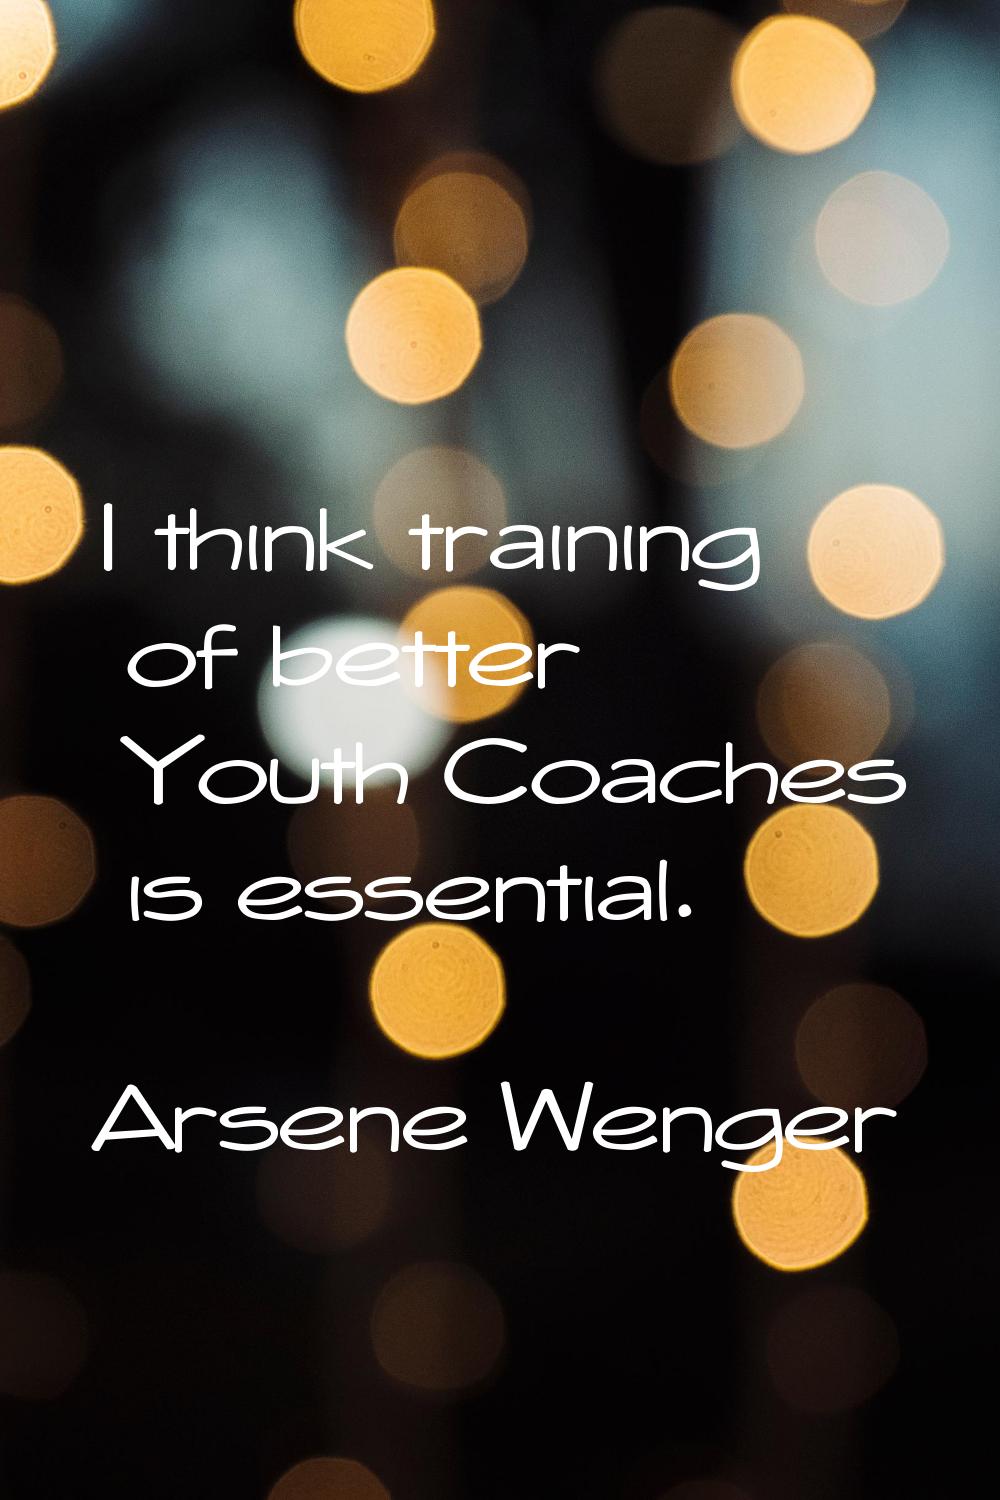 I think training of better Youth Coaches is essential.